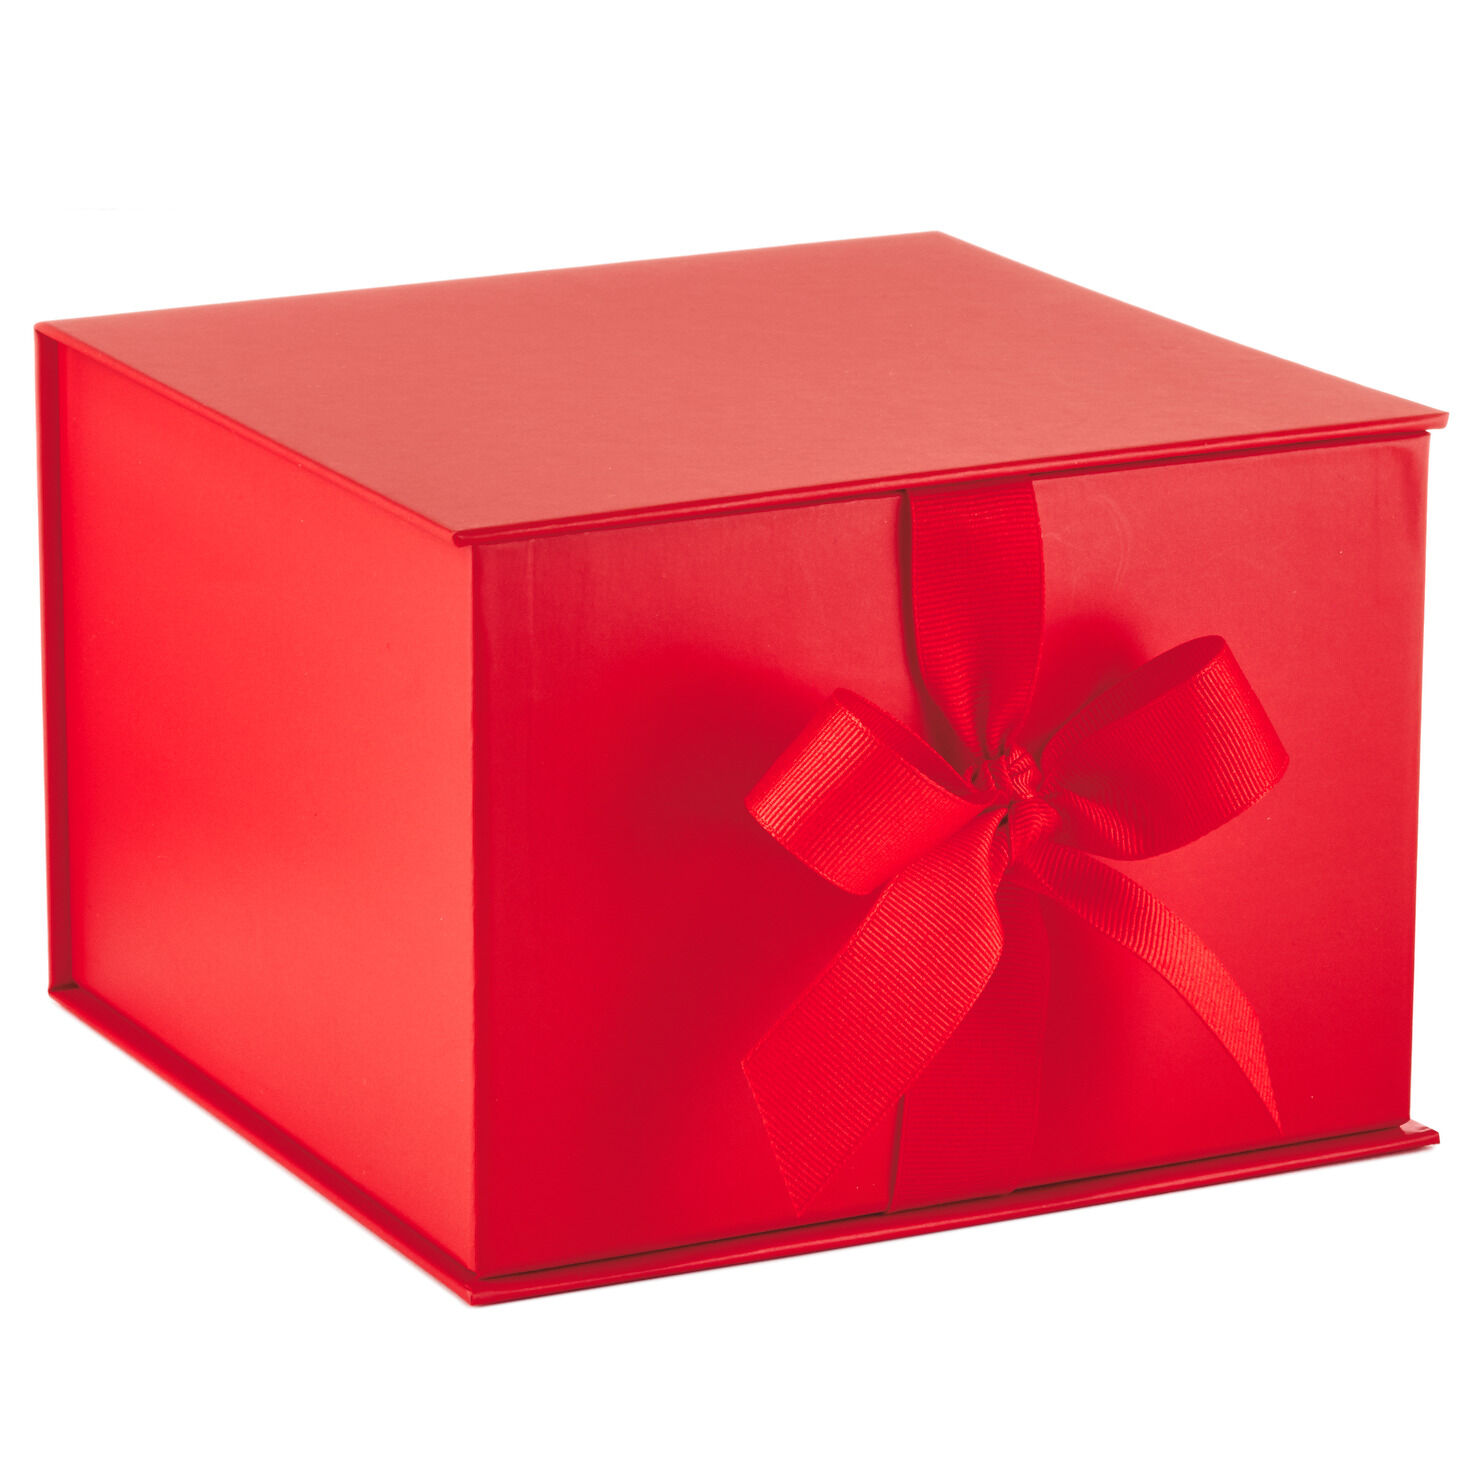 Red Large Gift Box With Shredded Paper Filler - Gift Boxes - Hallmark